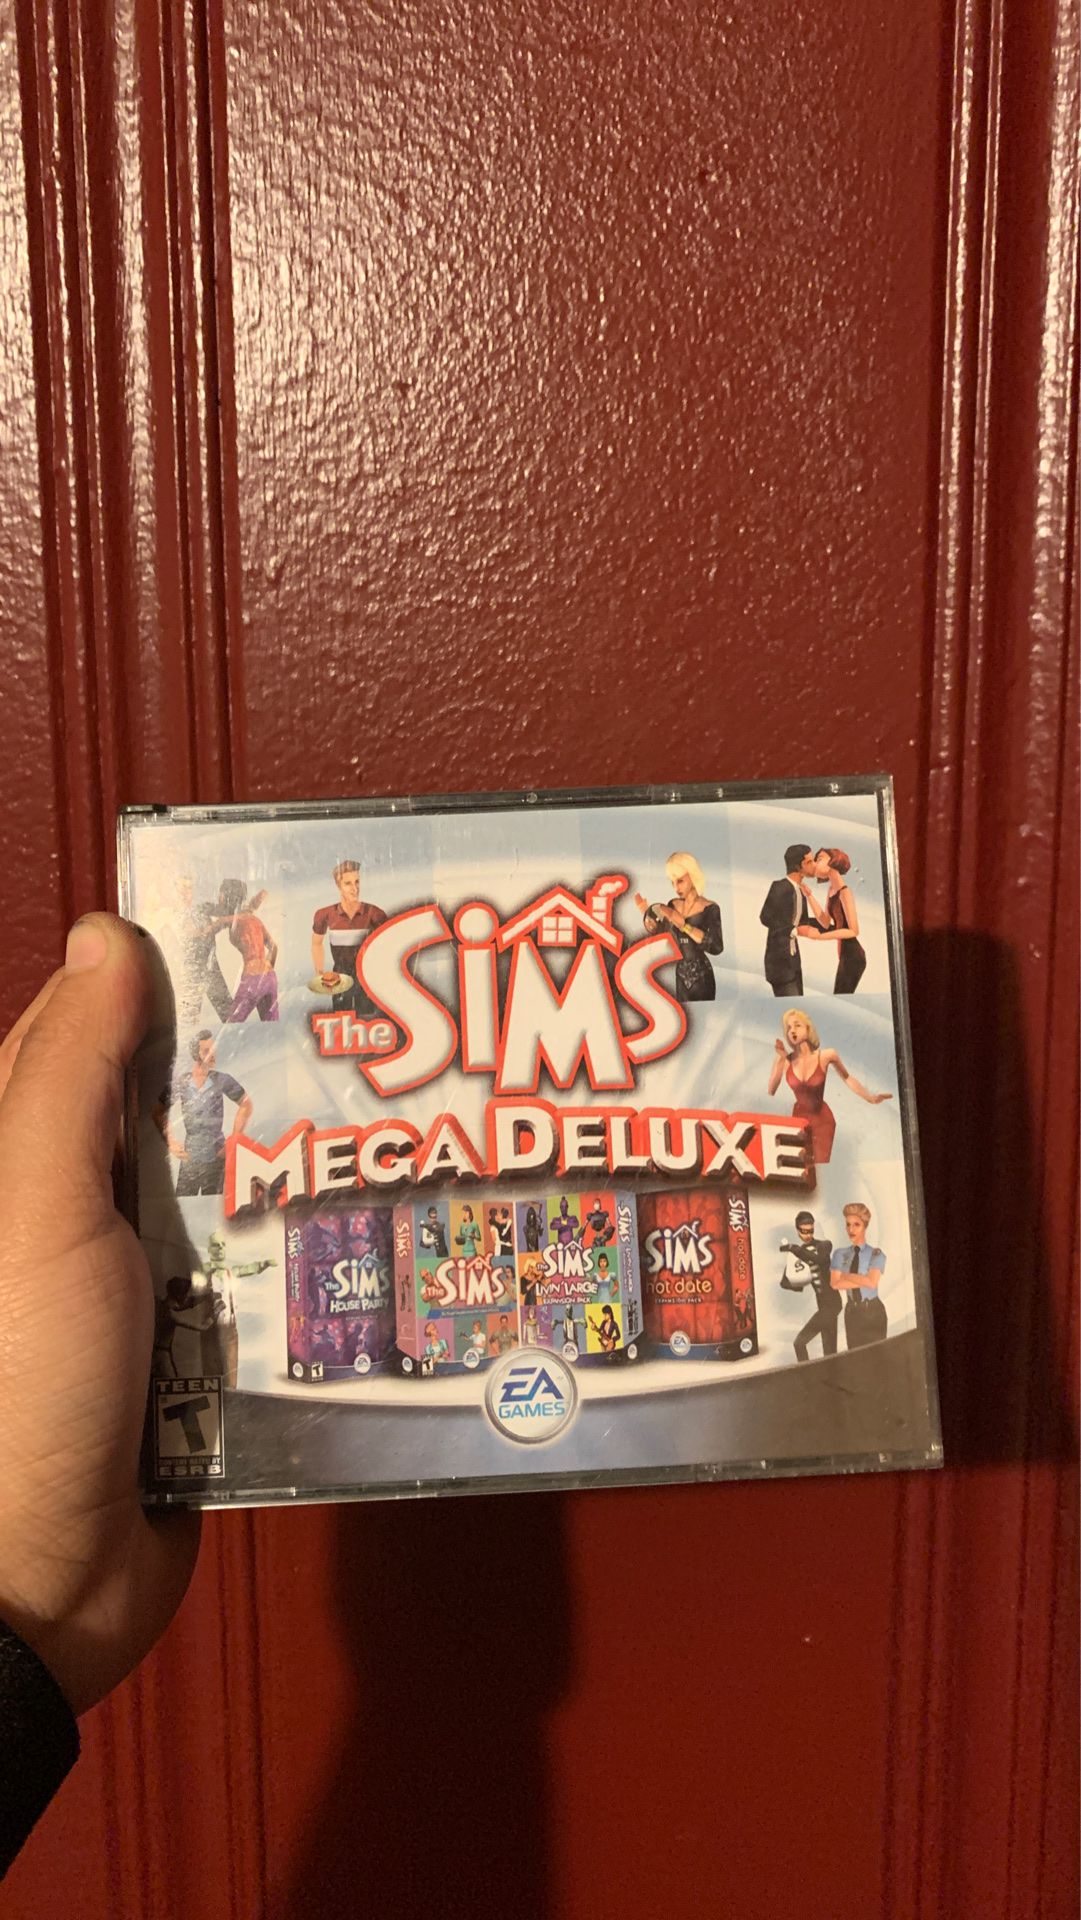 Sims PC game